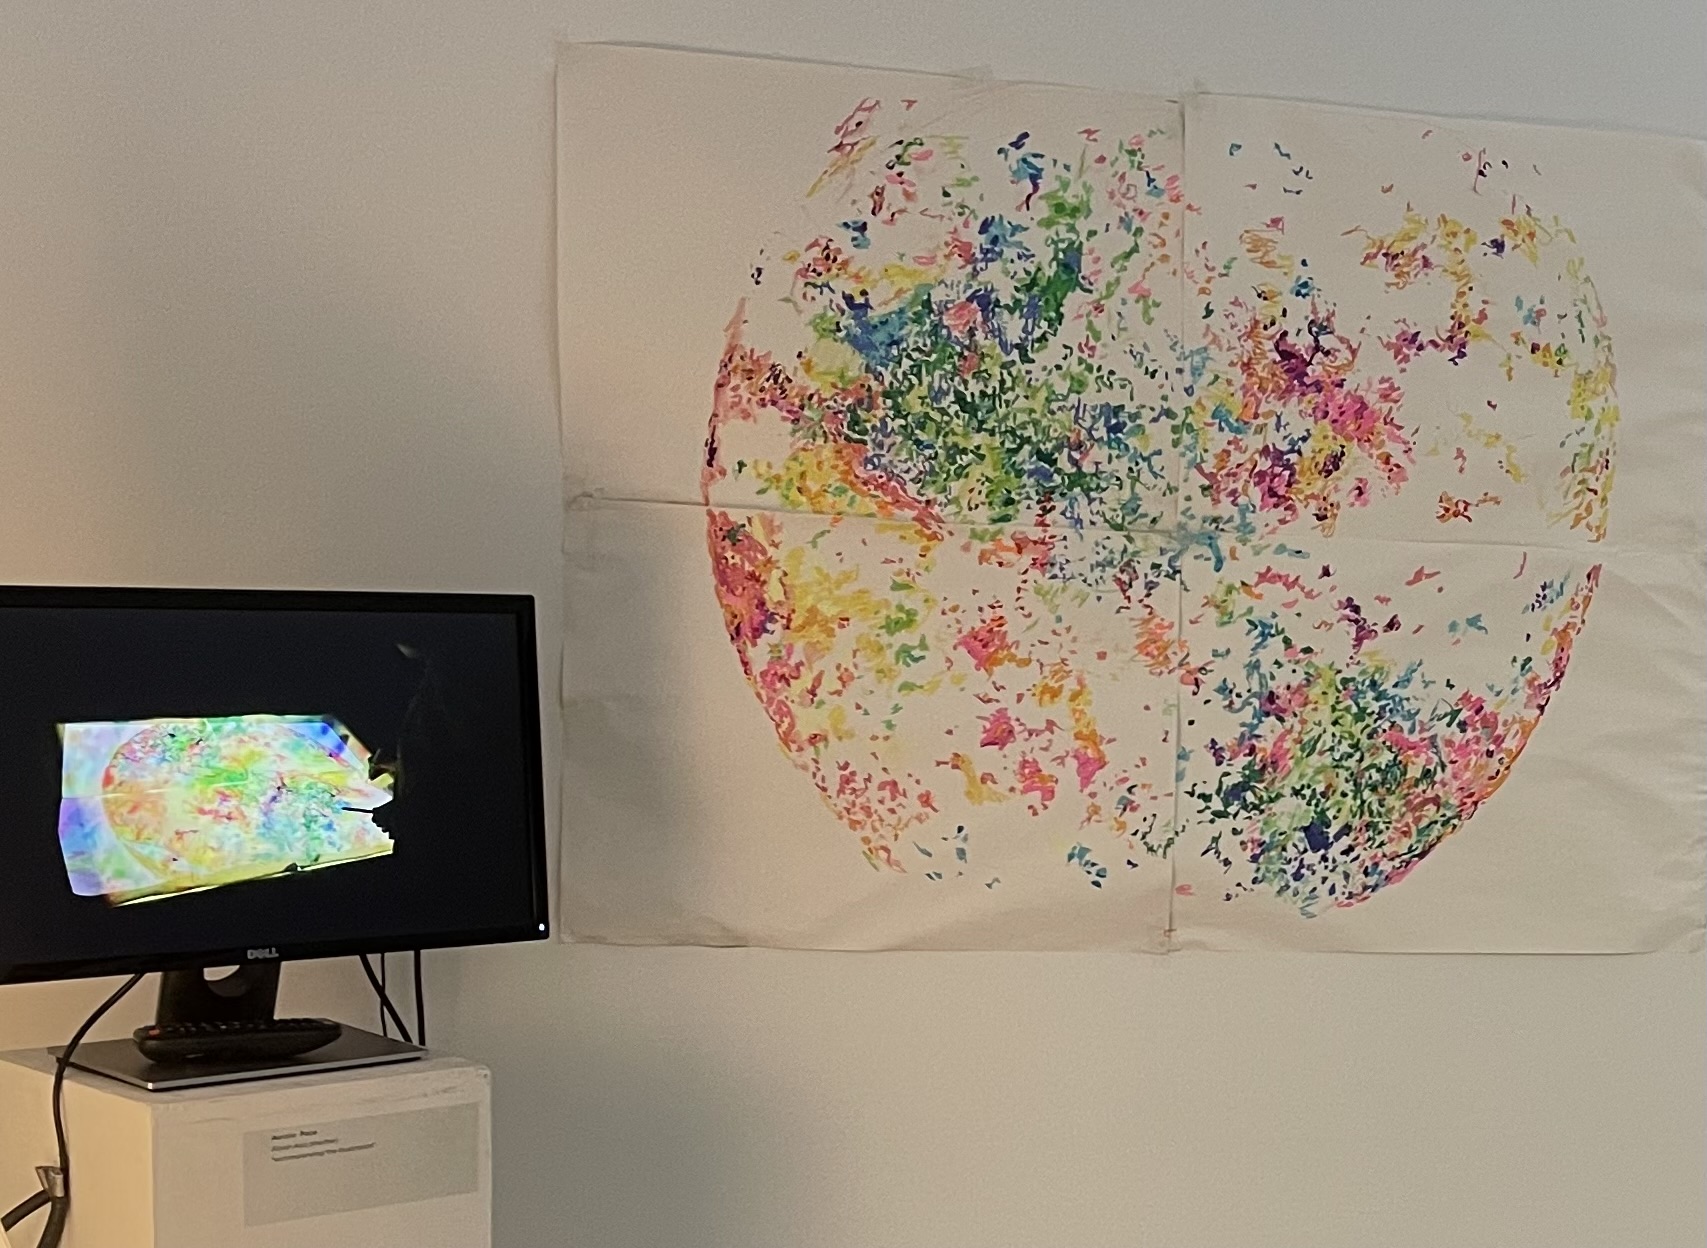 Four sheets join together to create a depiction of the earth in beautiful colourful markings.  Also showing is a still from the accompanying video depicting the art work being created